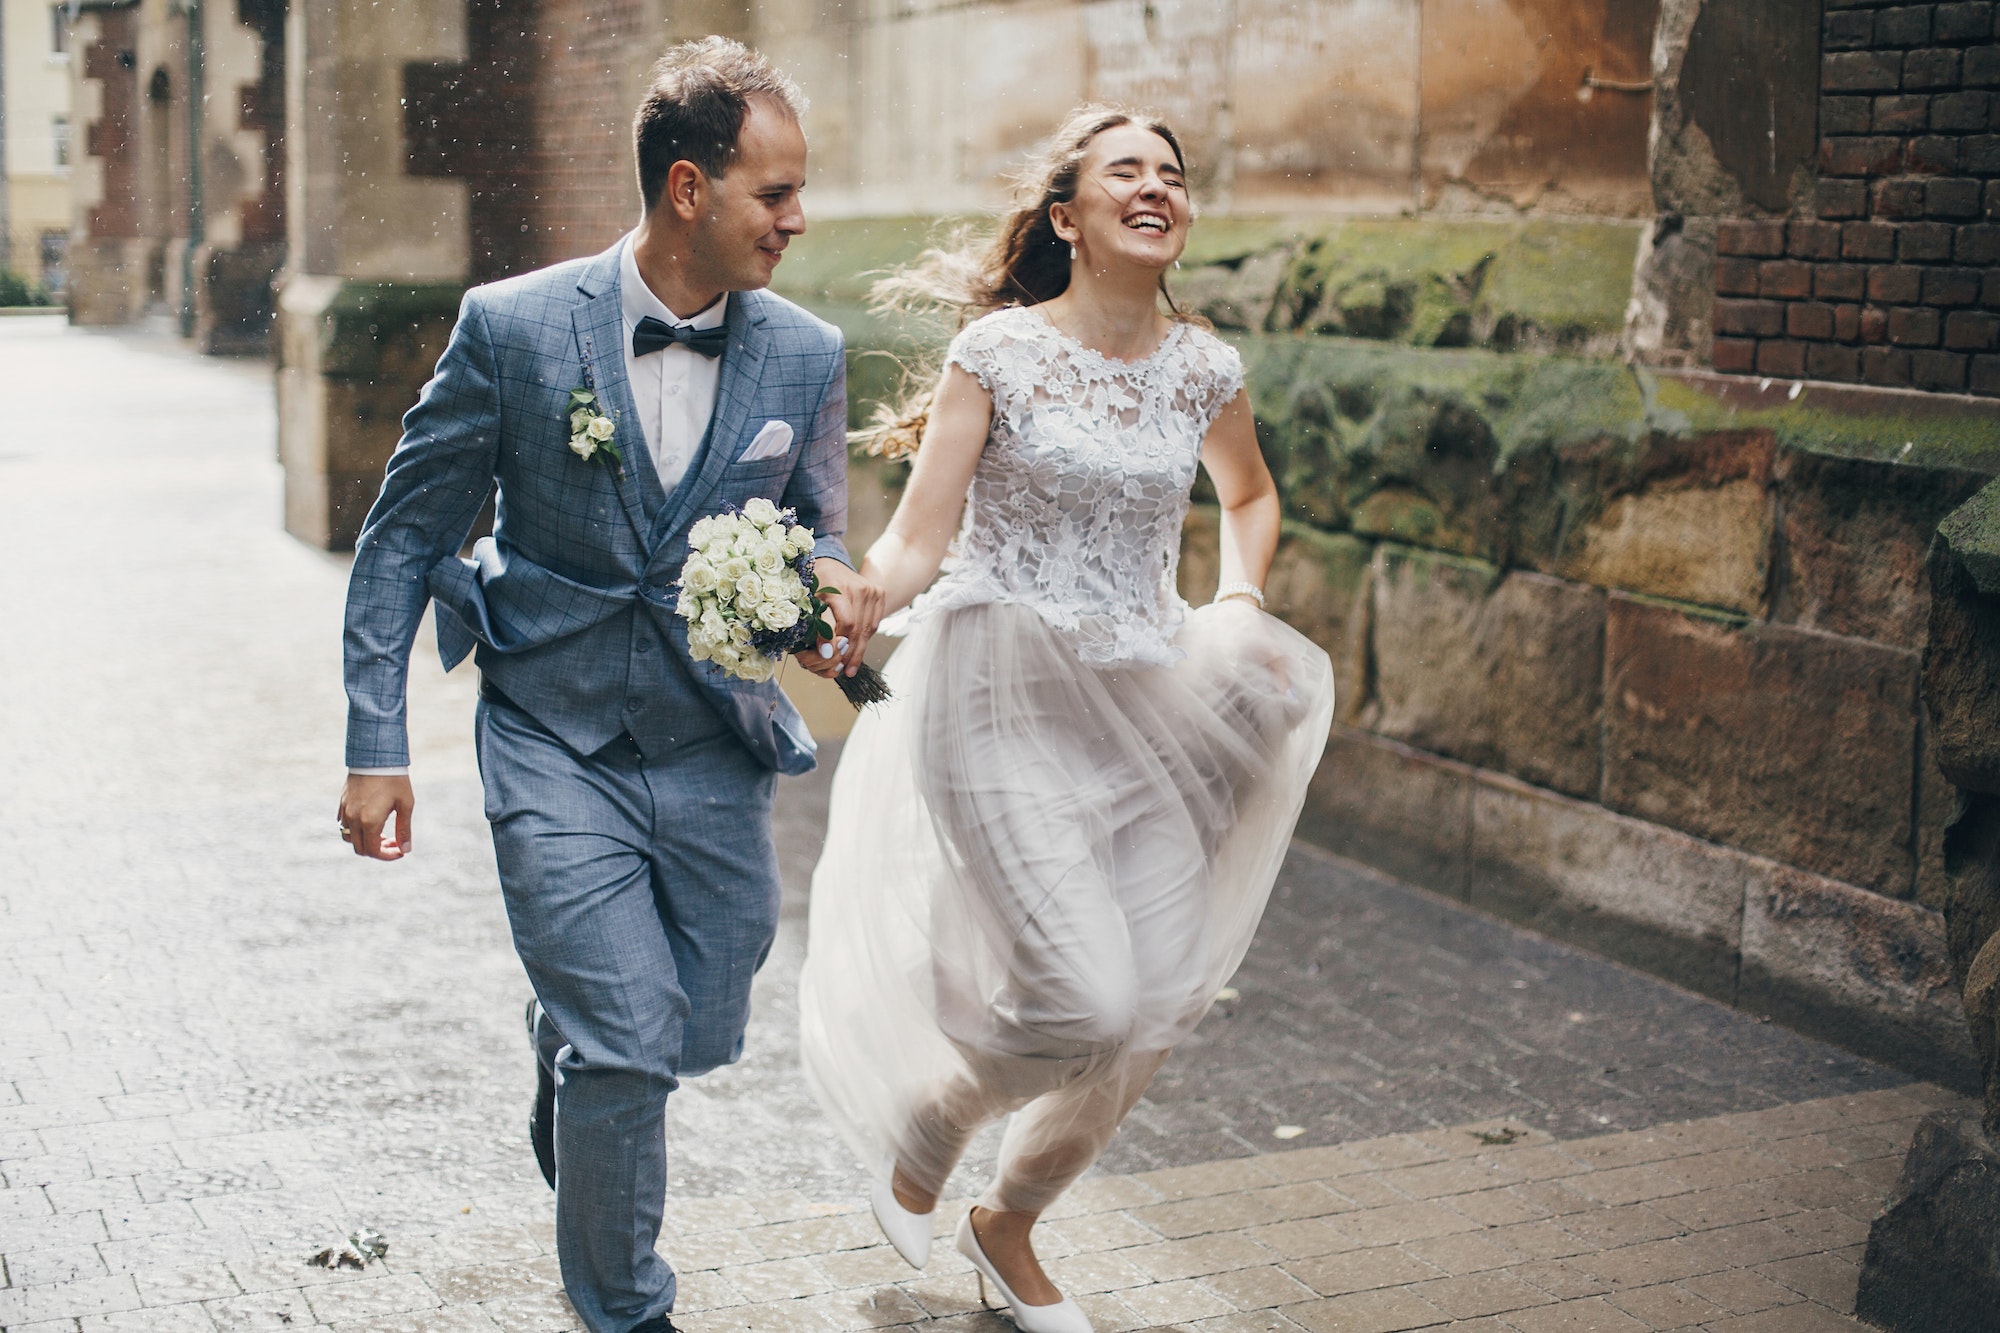 Stylish happy bride and groom running on background of old church in rainy street. Provence wedding